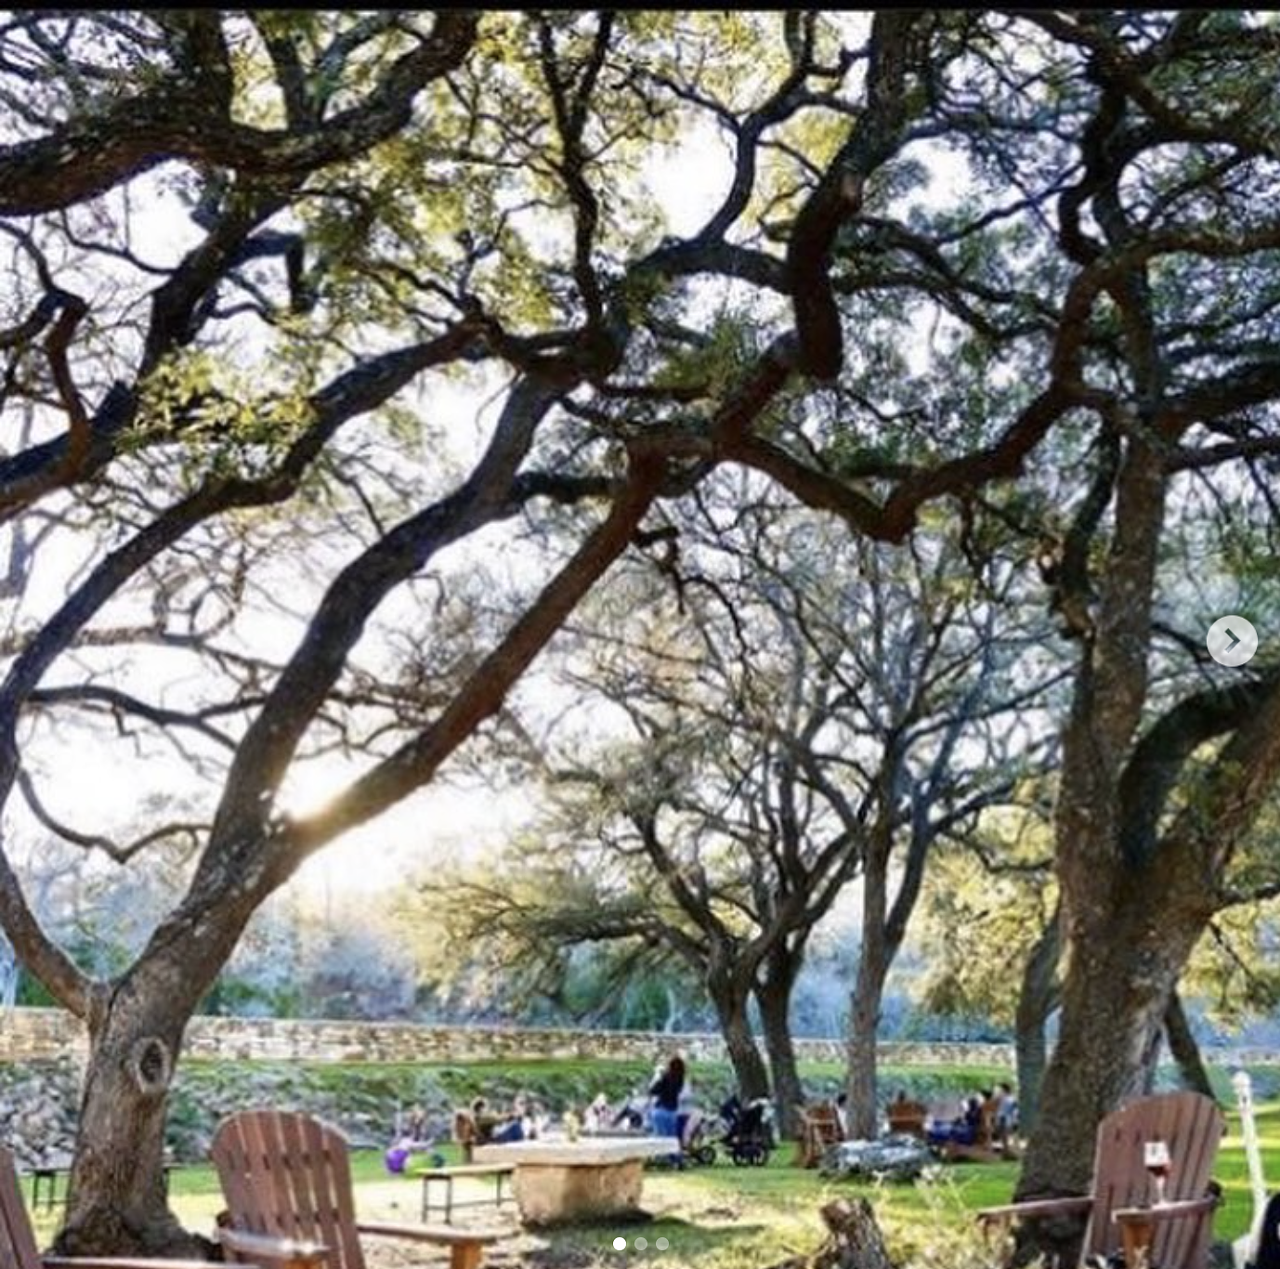 Dry Comal Creek Vineyards
1741 Herbelin Rd, New Braunfels, TX, (830) 885-4076, drycomalcreekvineyards.comThis New Braunfels winery is known for pioneering  'black Spanish’ style wines in Texas, so if hearty and spicy red wine is your jam, you definitely want to check this place out. The winery currently has 11 wines available for purchase by the bottle or via tastings, so there’s something for everyone. Plus, you can’t beat their large, super-shady outdoor space.
Photo via Instagram / uncorktexaswines